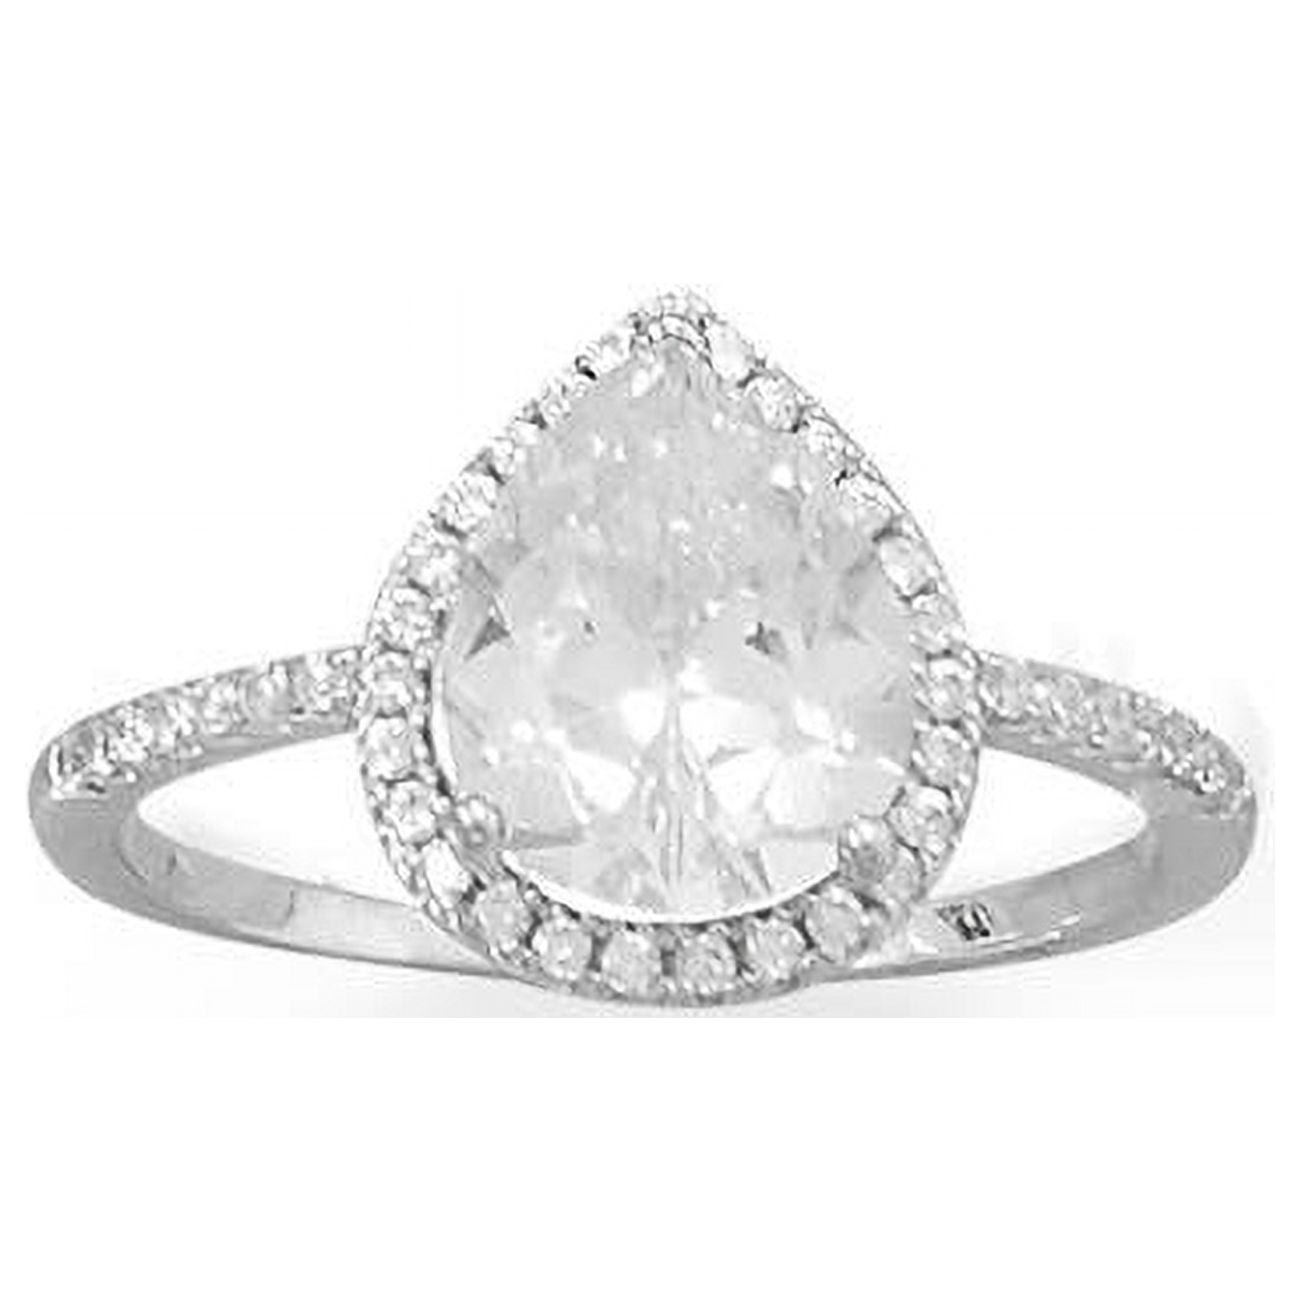 Picture of Precious Stars 83804-10 Sterling Silver Pear-Cut Cubic Zirconia Halo Engagement Ring - Size 10